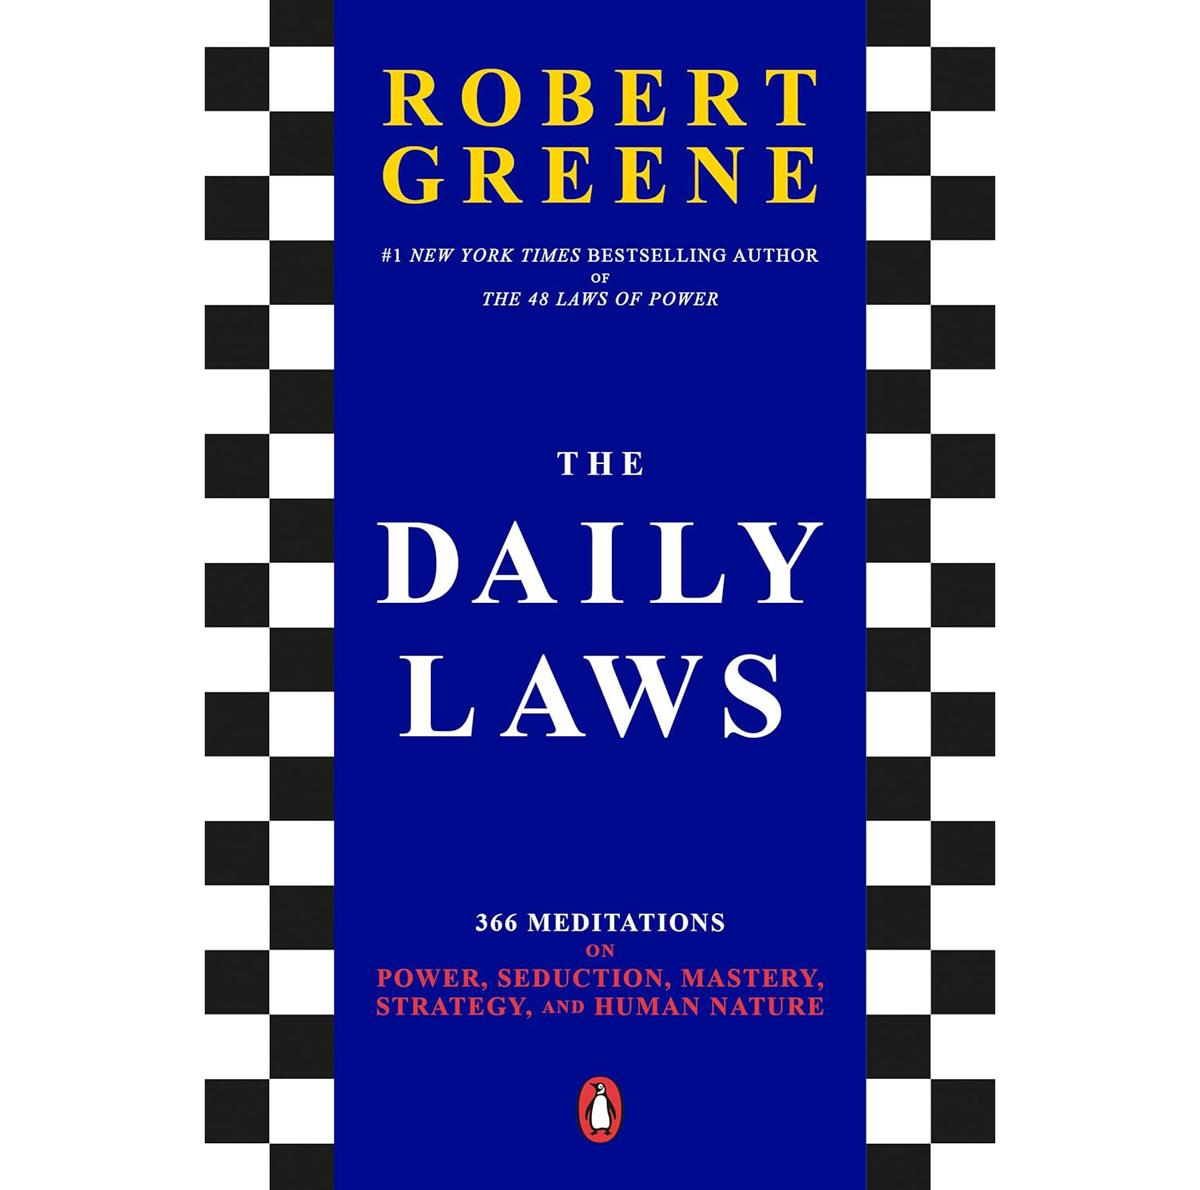 The Daily Laws 366 Meditations on Power and Human Nature eBook for $1.99